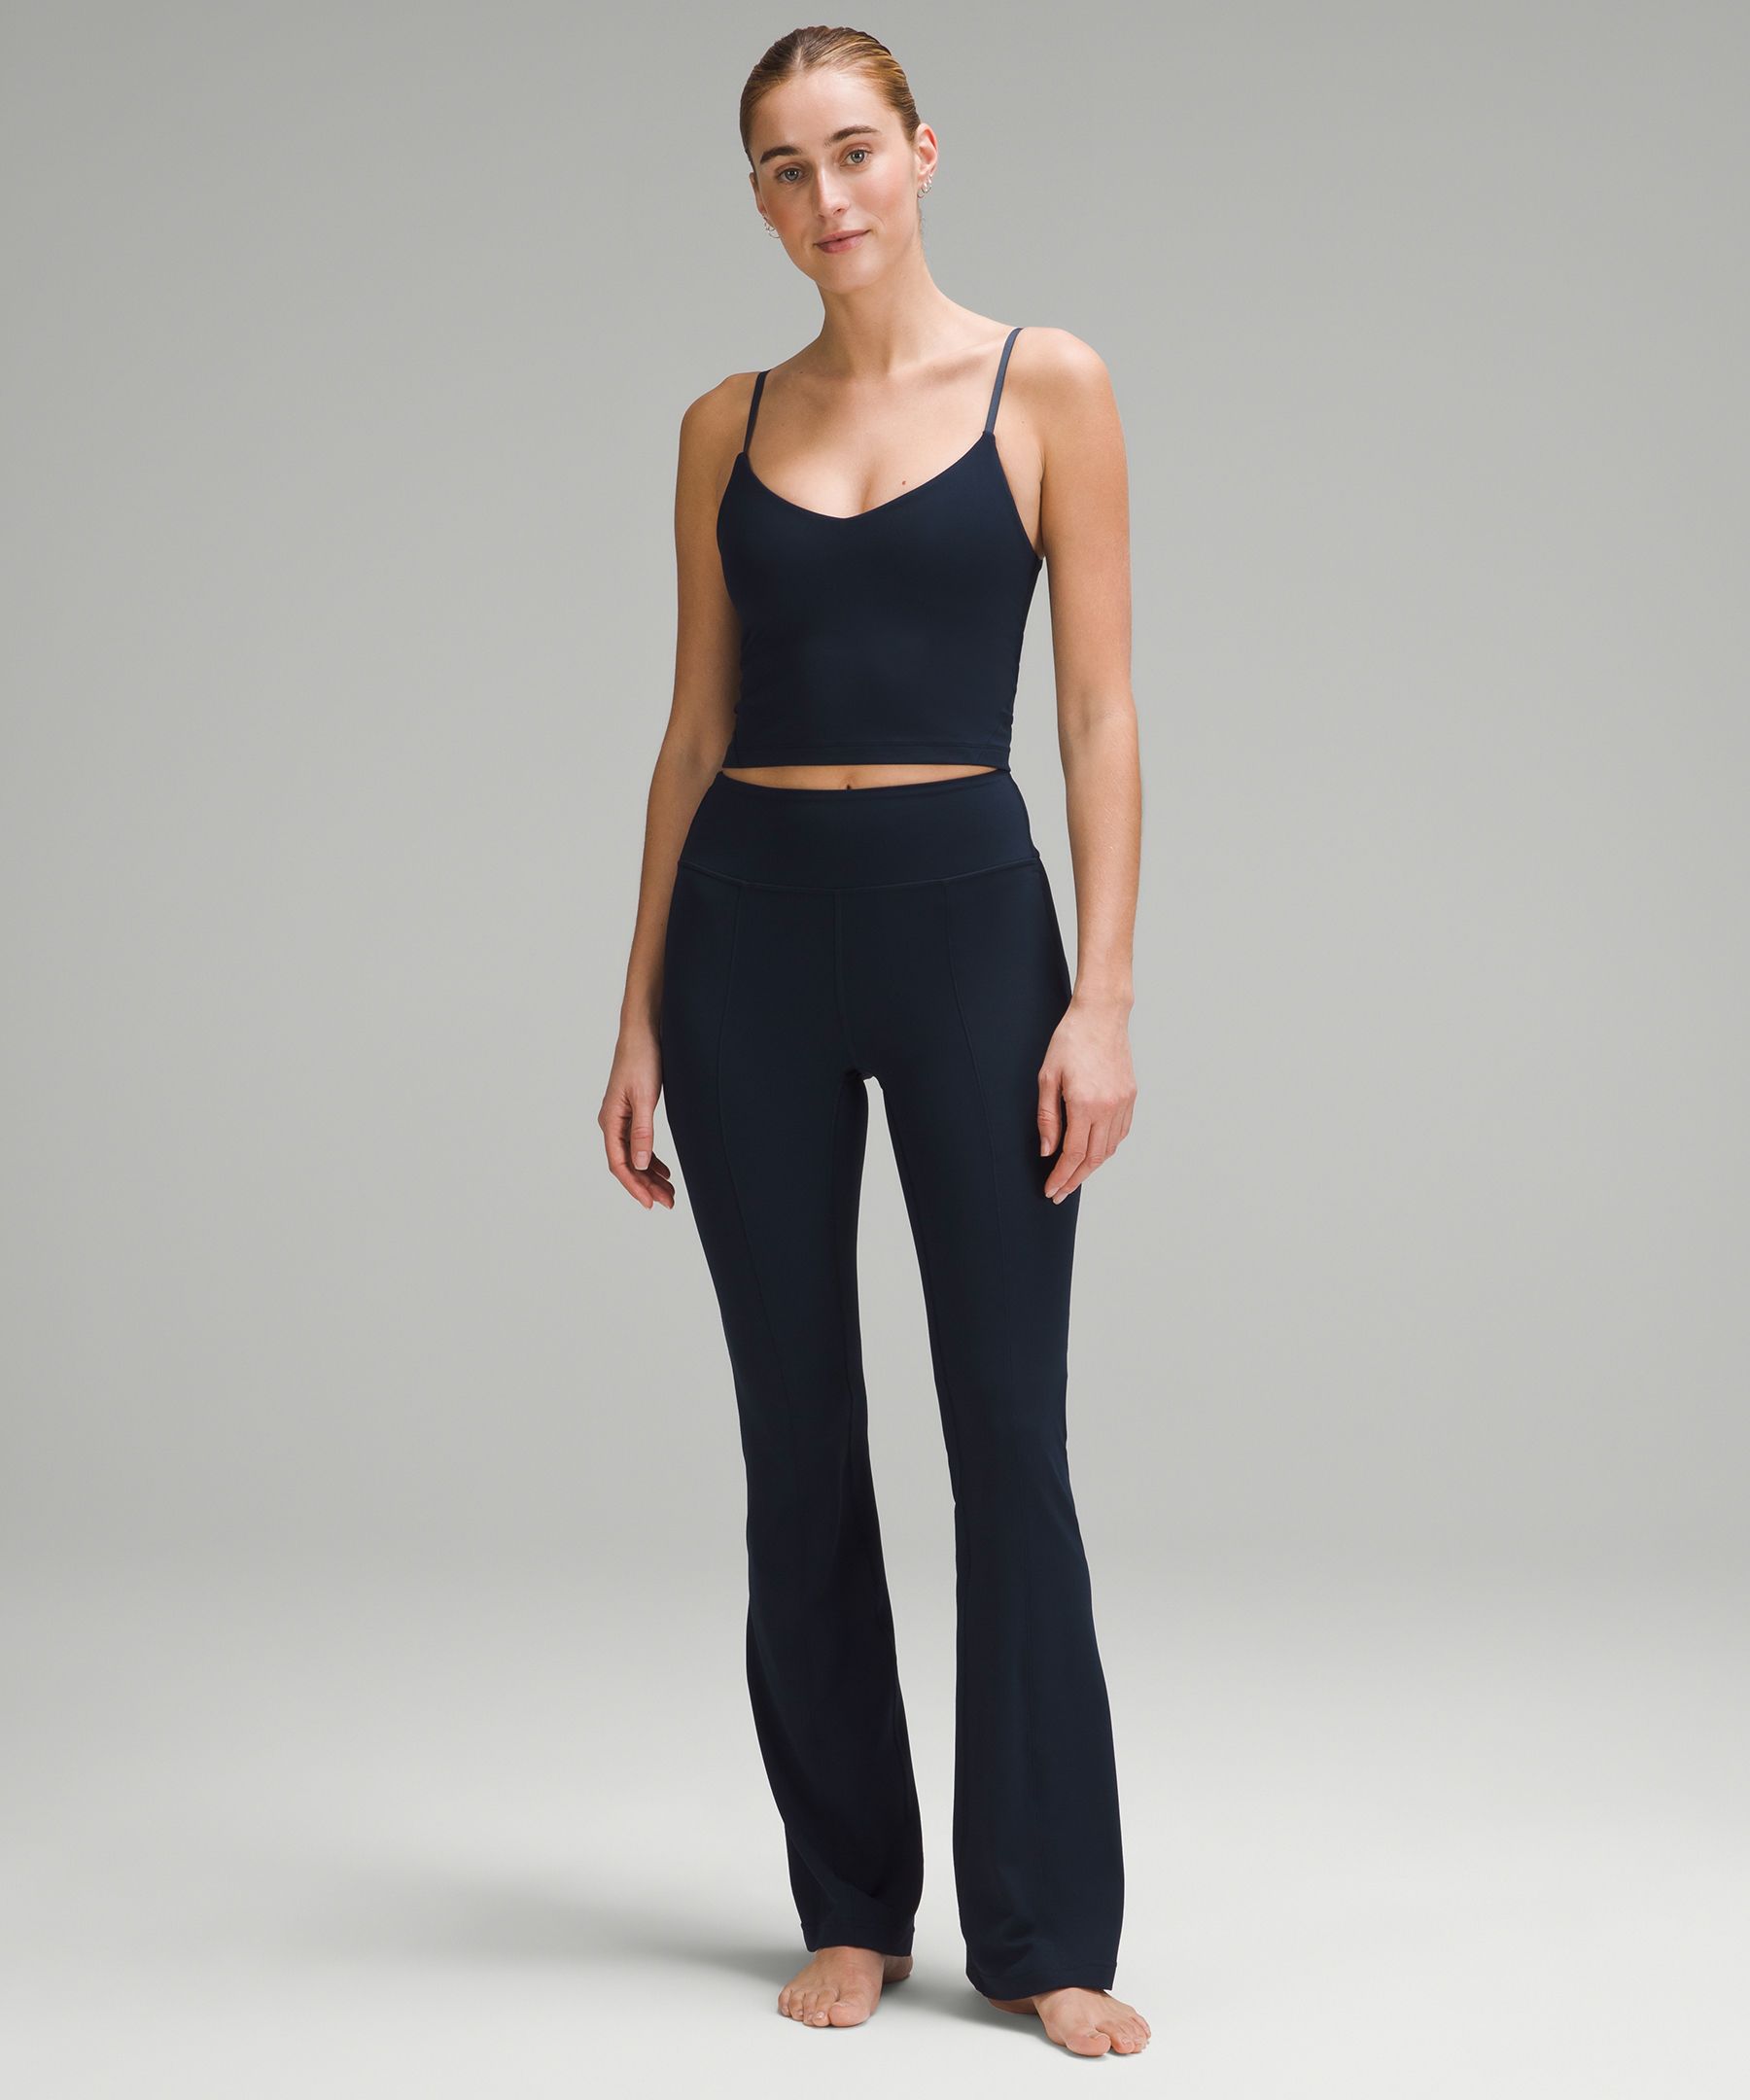 Lululemon Groove Flare Pants Green Size 4 - $80 (32% Off Retail) - From  Kendall